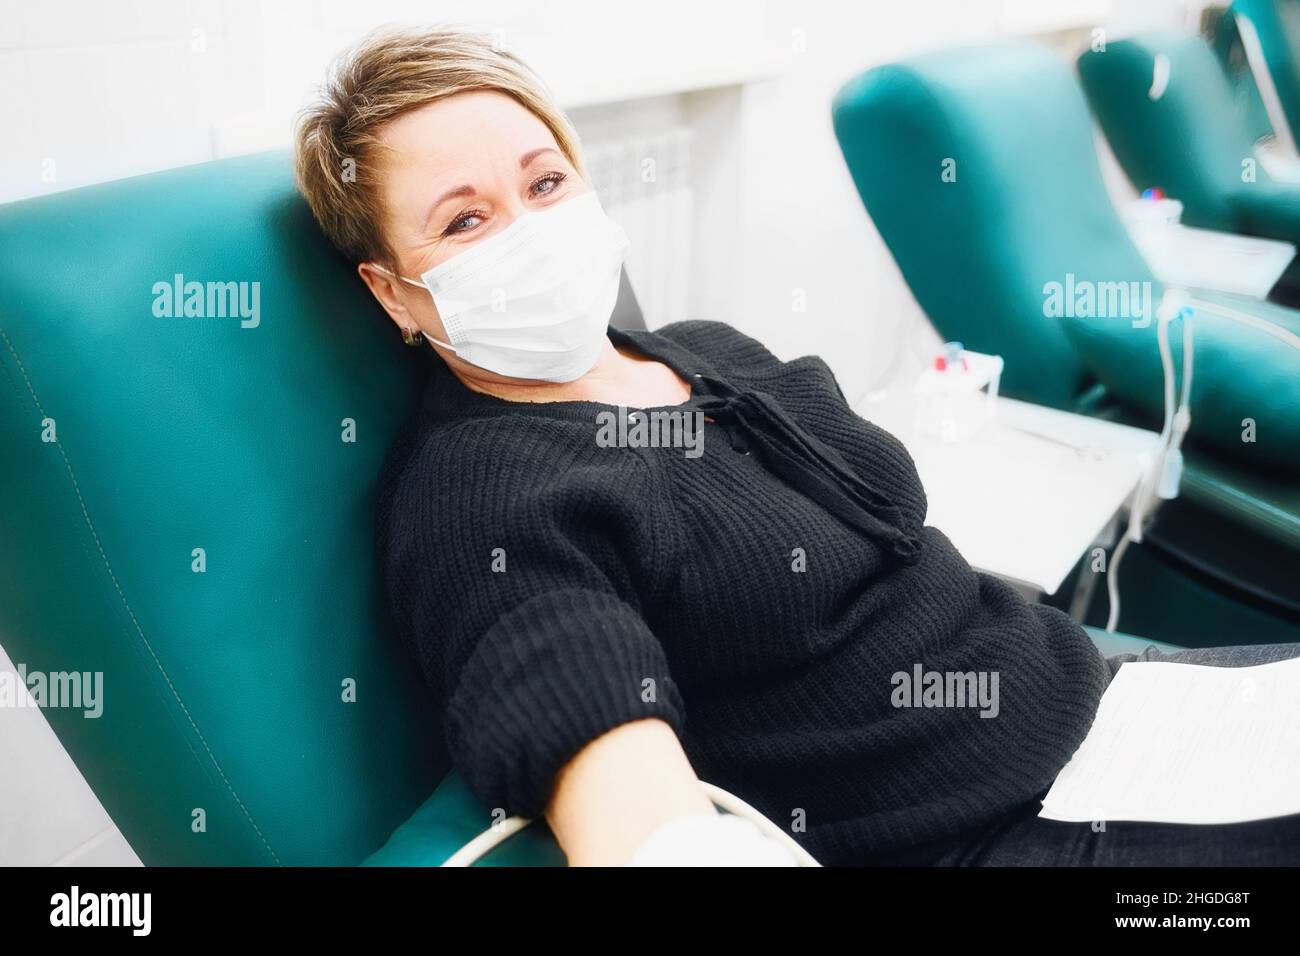 Woman of 40-50 years old in medical mask on her face sits in chair and donates blood from vein. Donation and care for sick. Real scene. Stock Photo